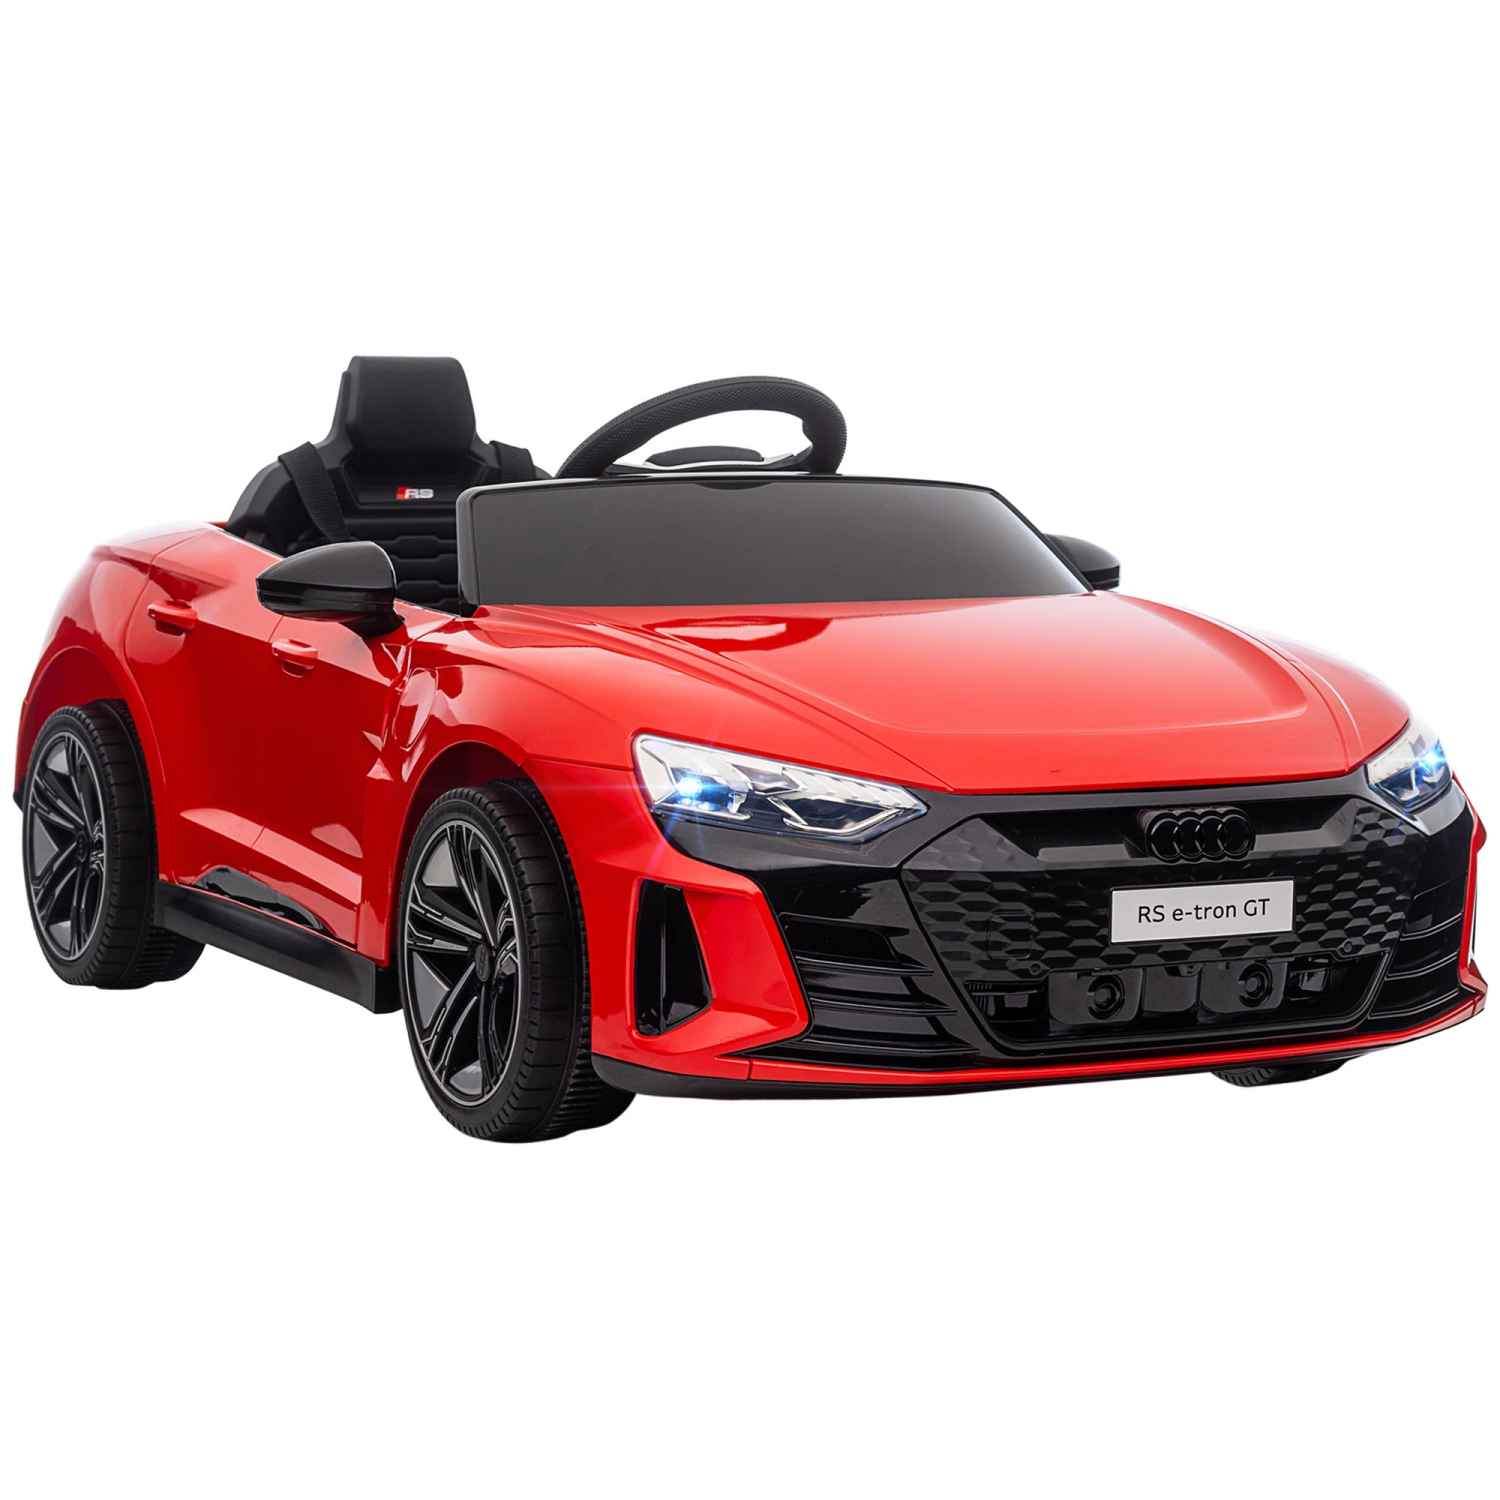 Aosom Electric Ride On Car with Remote Control, 12V 3.1 MPH Kids Ride-On Toy for Boys and Girls with Suspension System, Horn Honking, Music, Lights, Red